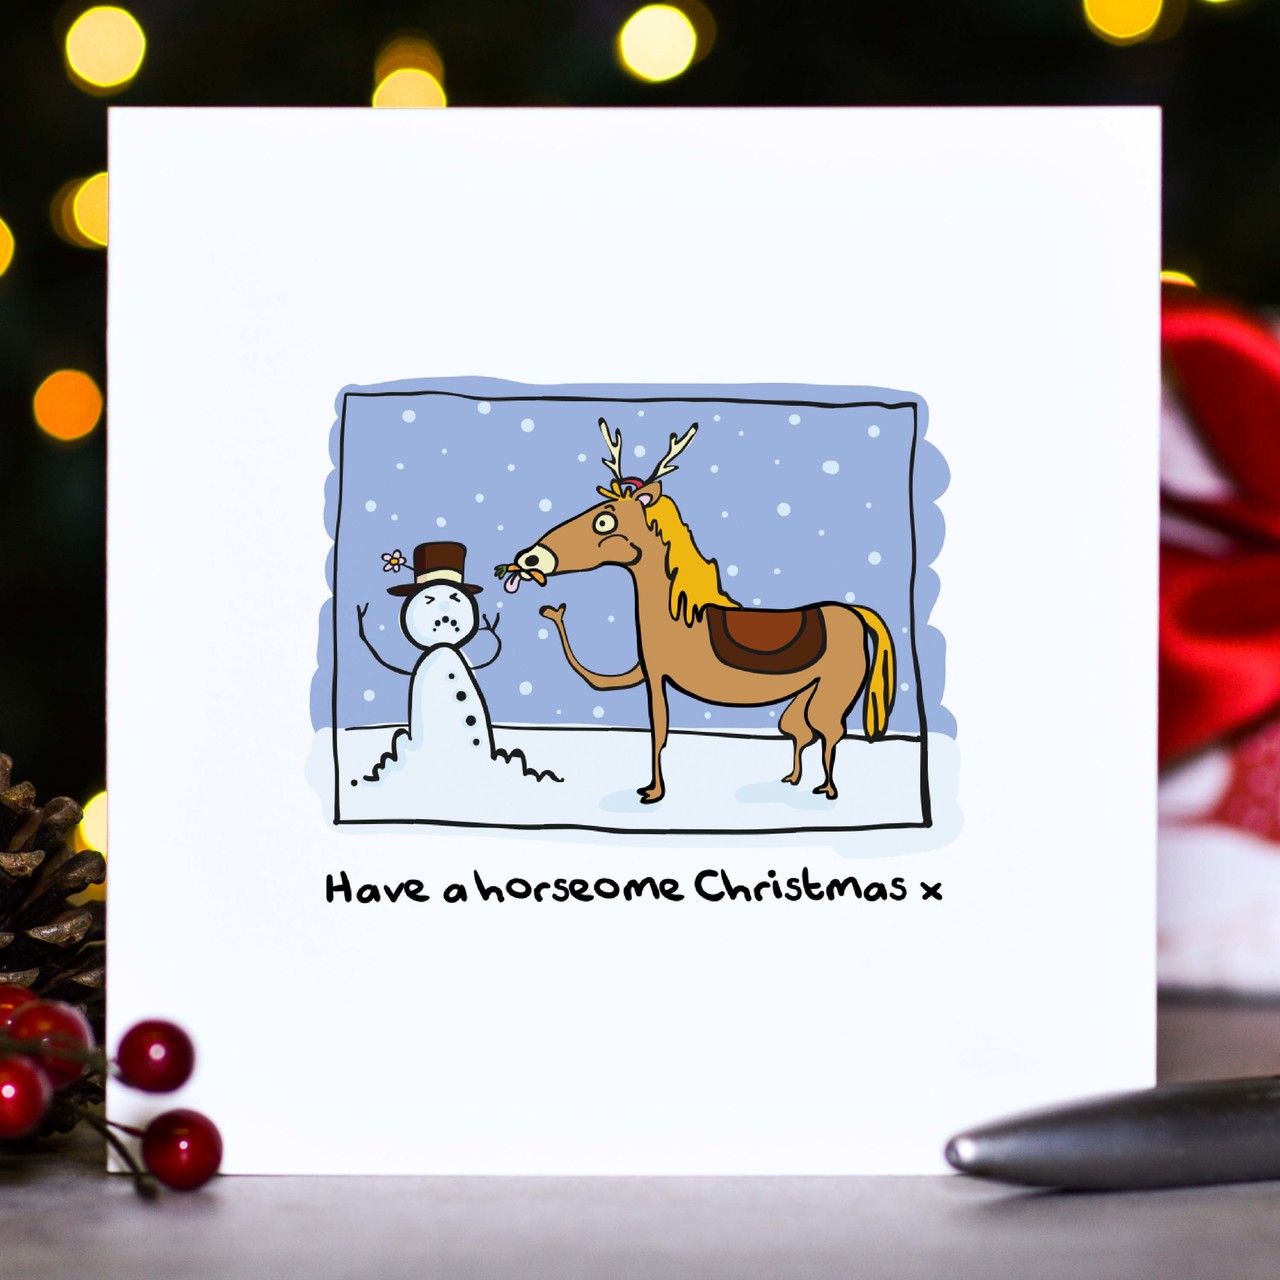 Have a horseome Christmas Card